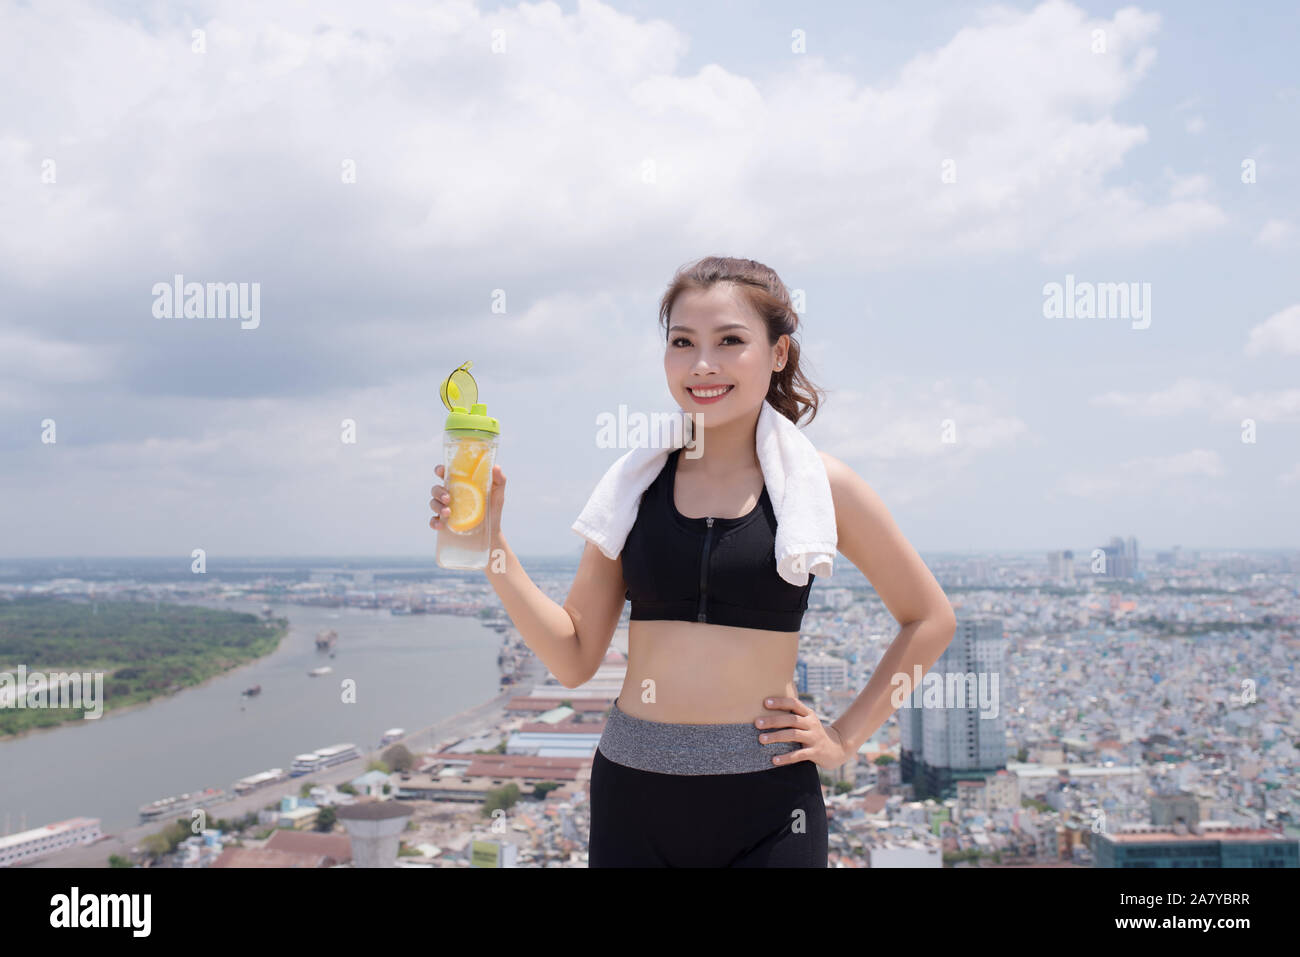 Technology and healthy lifestyle. Pretty young woman in sports wear holding bottle of water outdoors Stock Photo